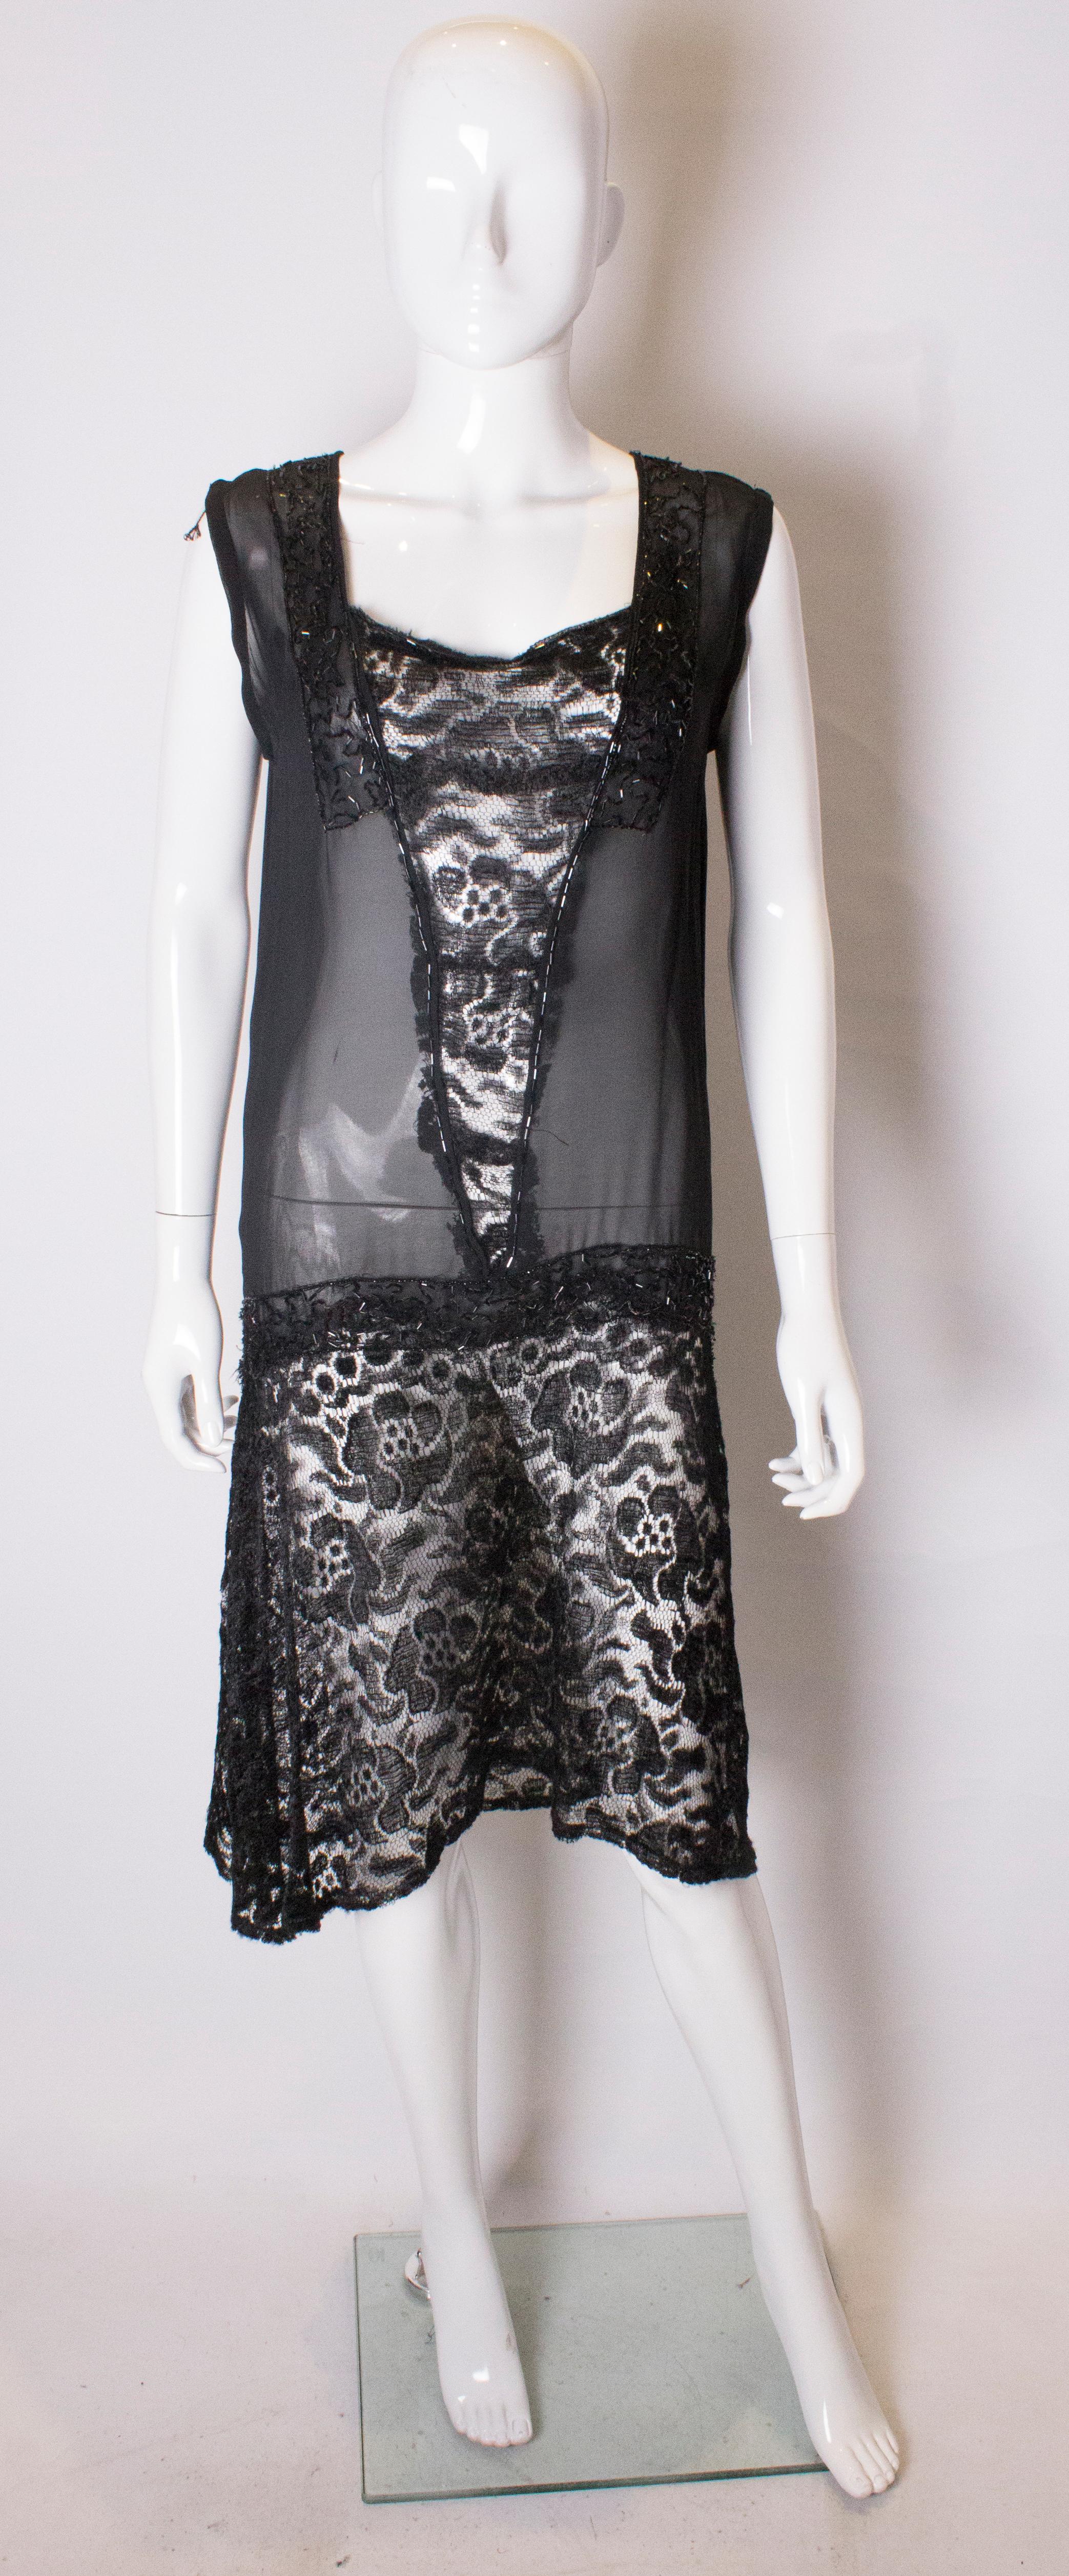 A pretty 1920s style cocktail dress. The dress has a v neckline with a lace skirt  , central lace panel and bead decoration.